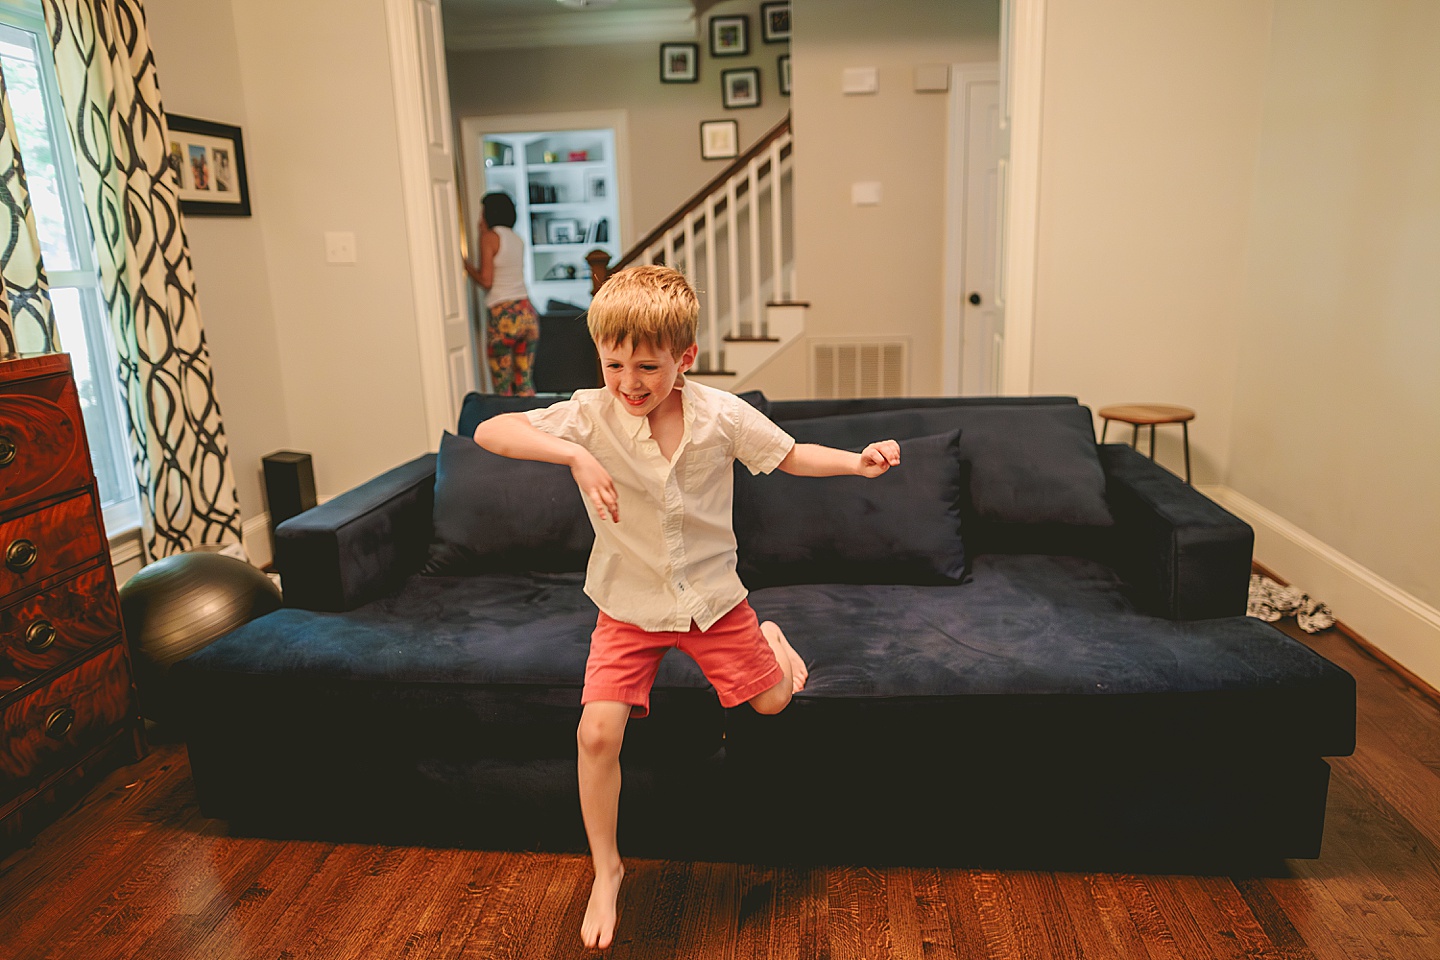 Kid jumping off couch